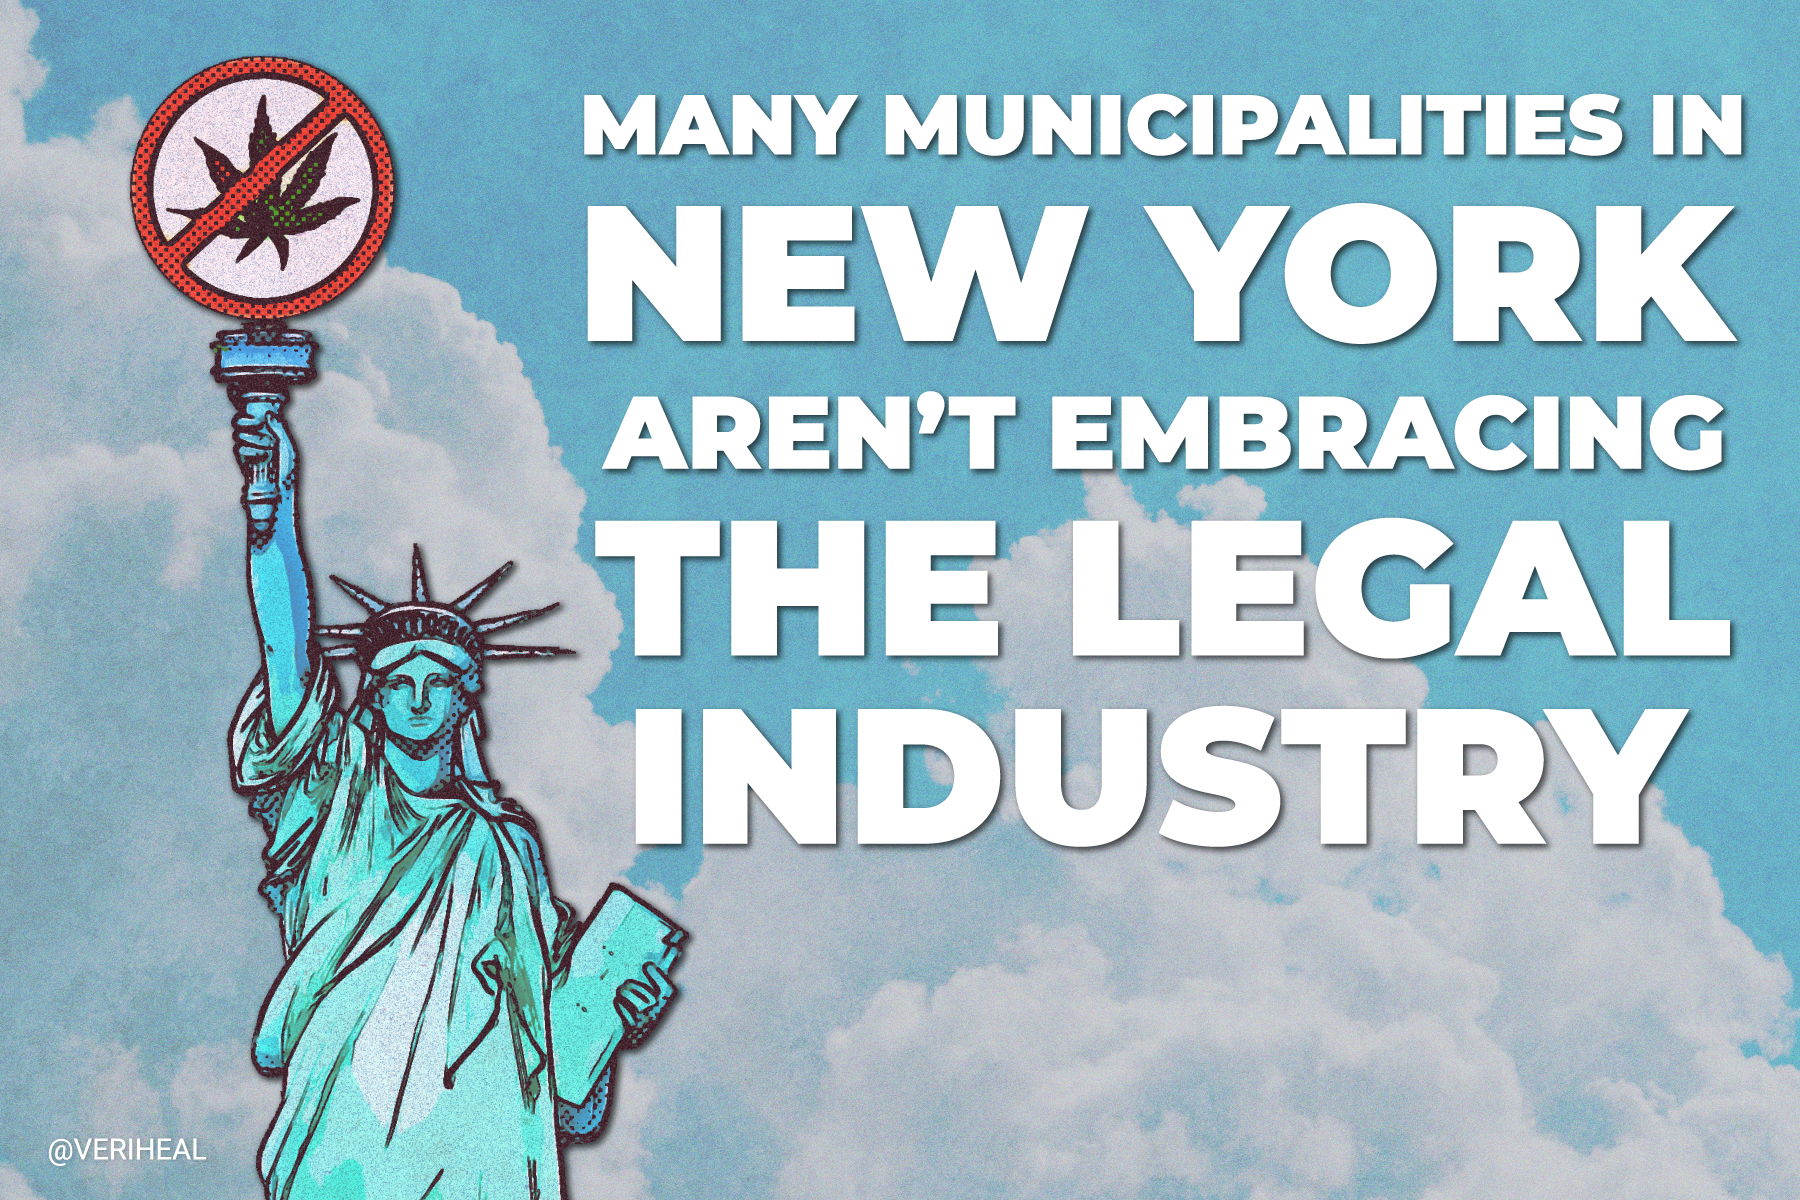 Many Municipalities in New York Aren’t Embracing the Legal Industry